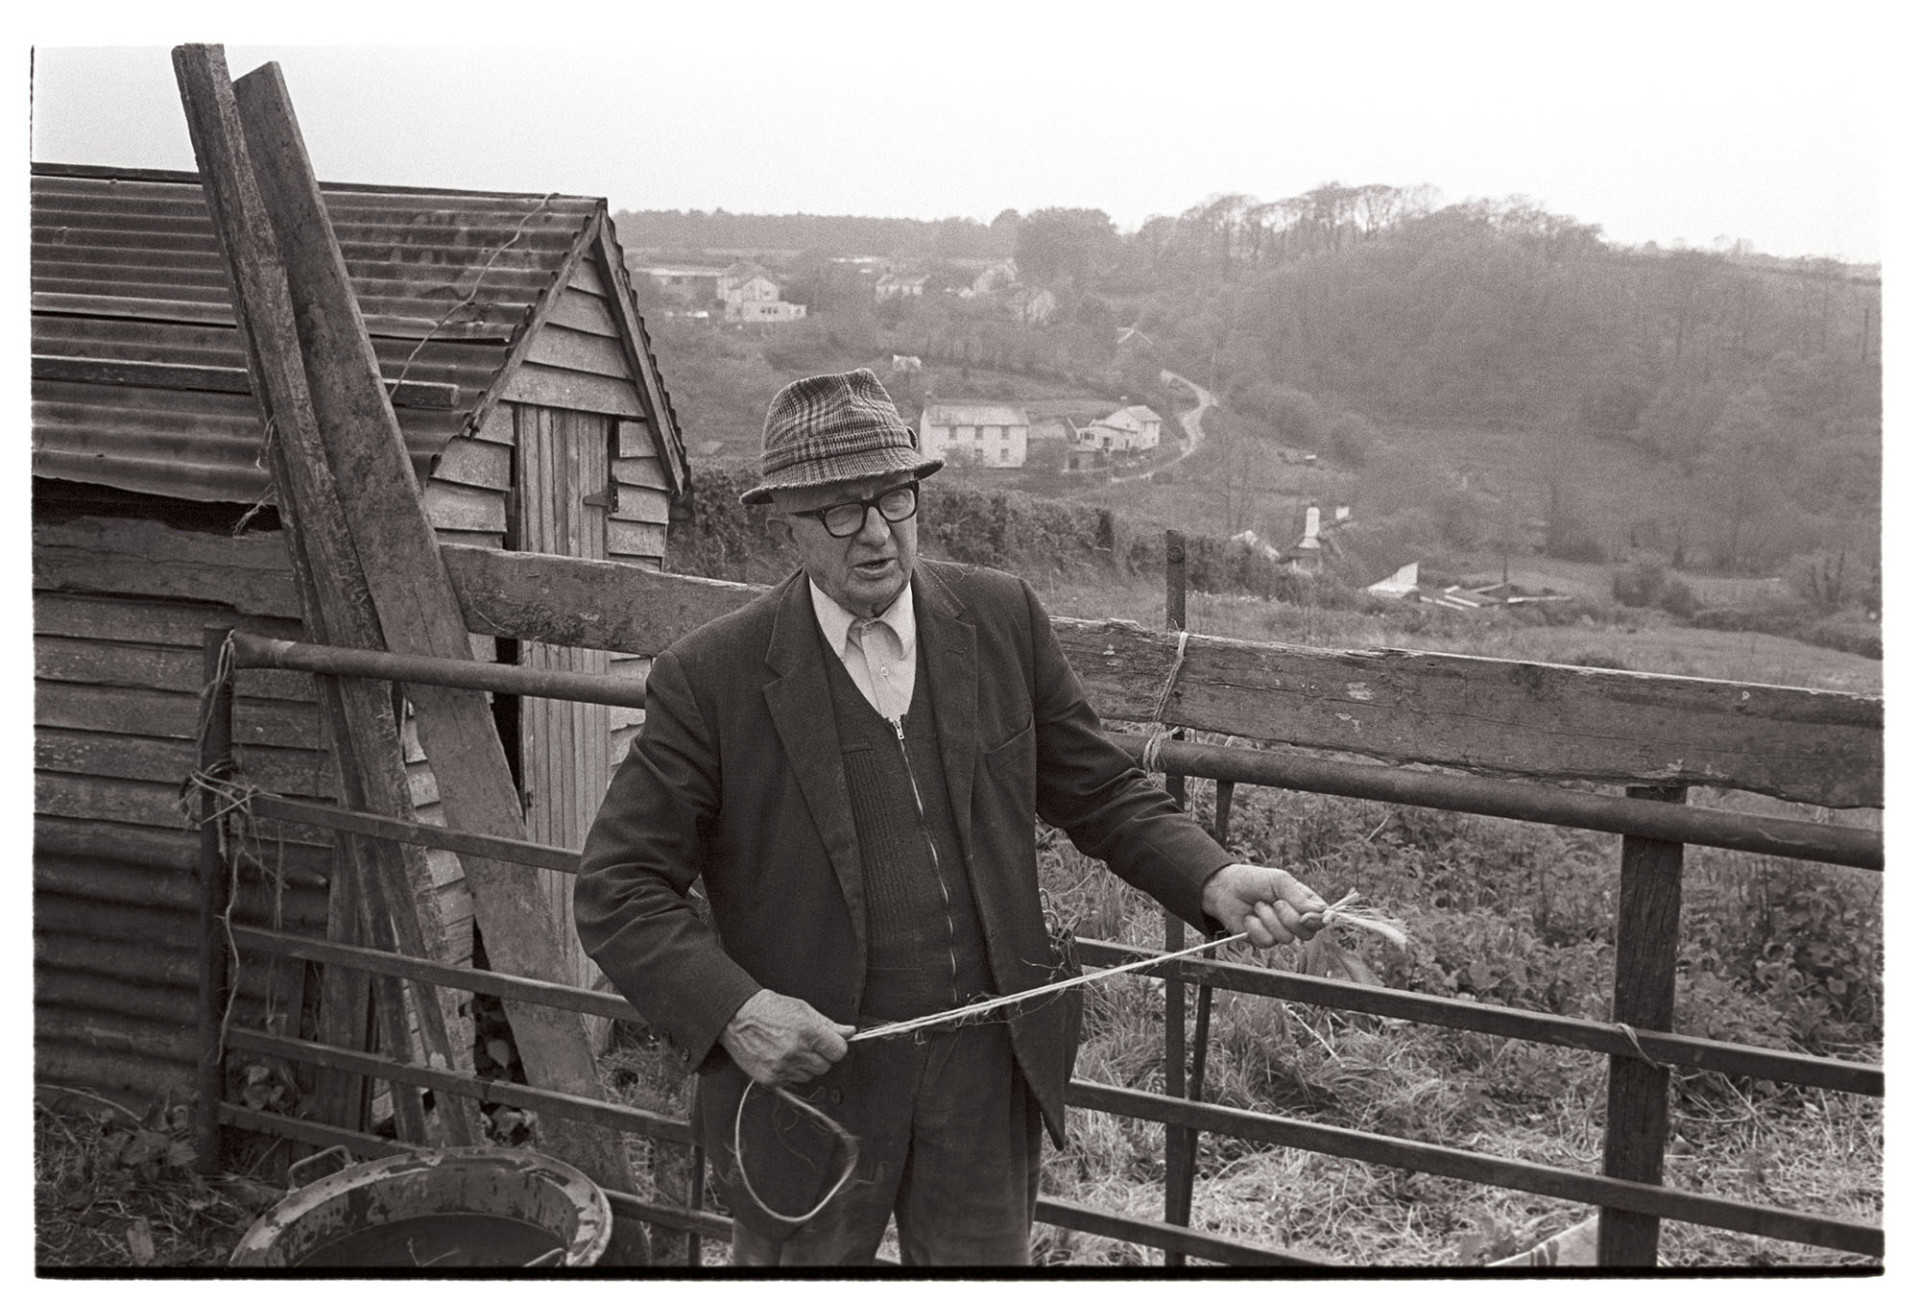 Farmer chatting to me [James Ravilious].
[Mr Parkhouse stood in front of a field gate and wooden barn with a corrugated iron roof at Hollocombe. The village can be seen in the distance. He is also holding a piece of twine.]